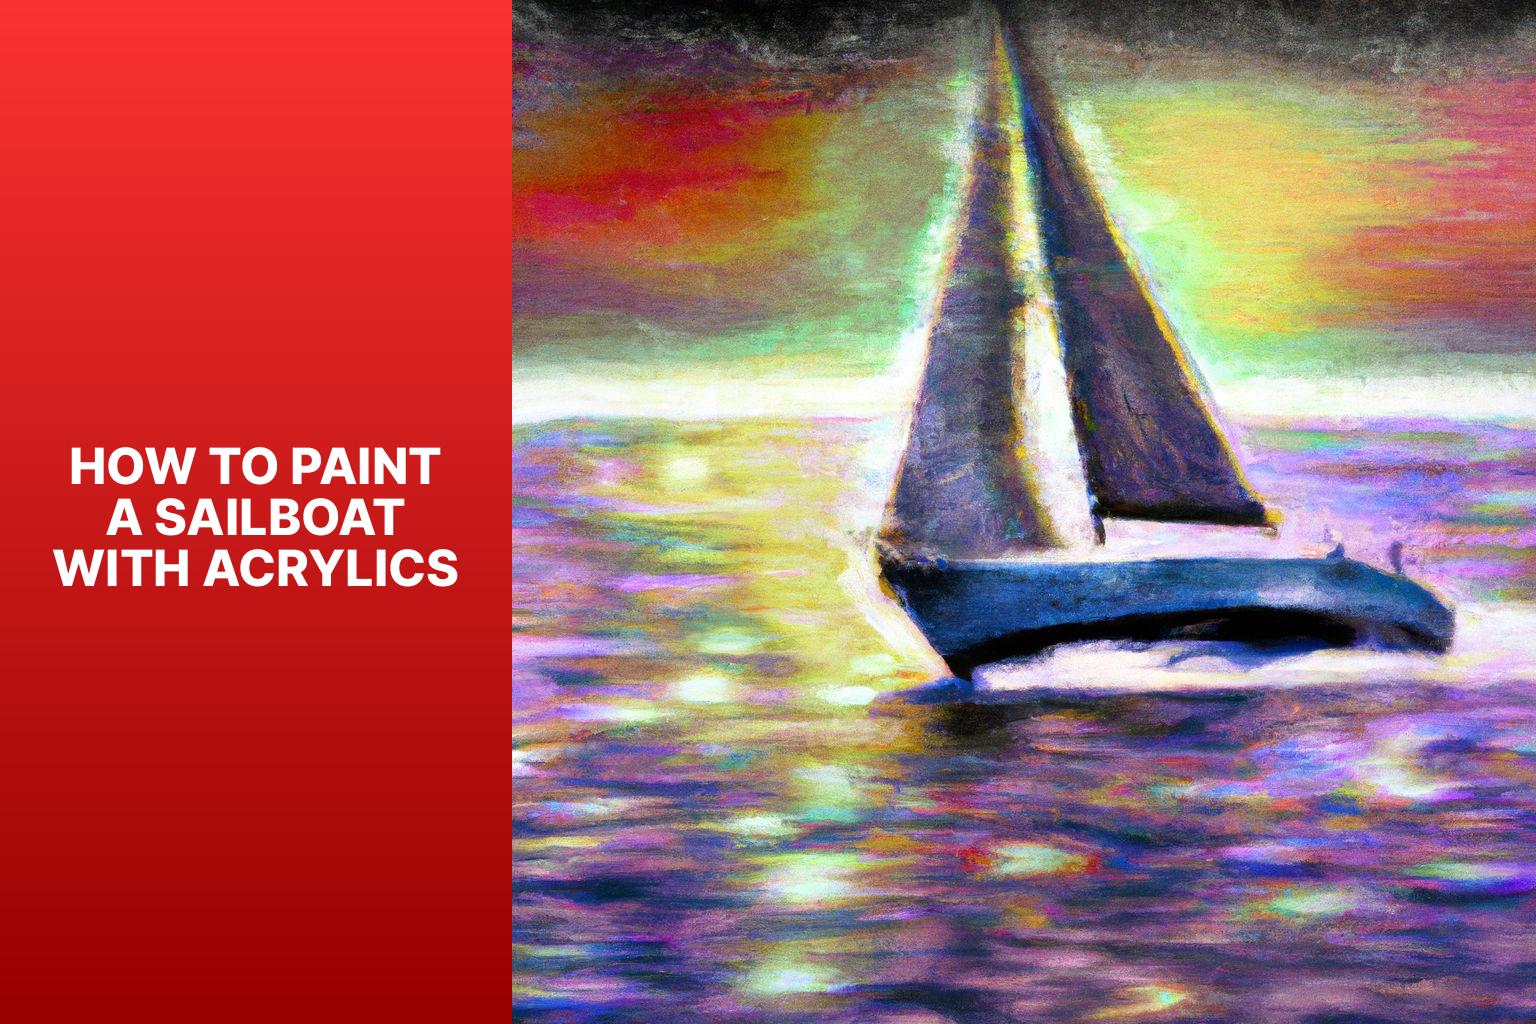 Step-by-Step Guide: How to Paint a Sailboat with Acrylics